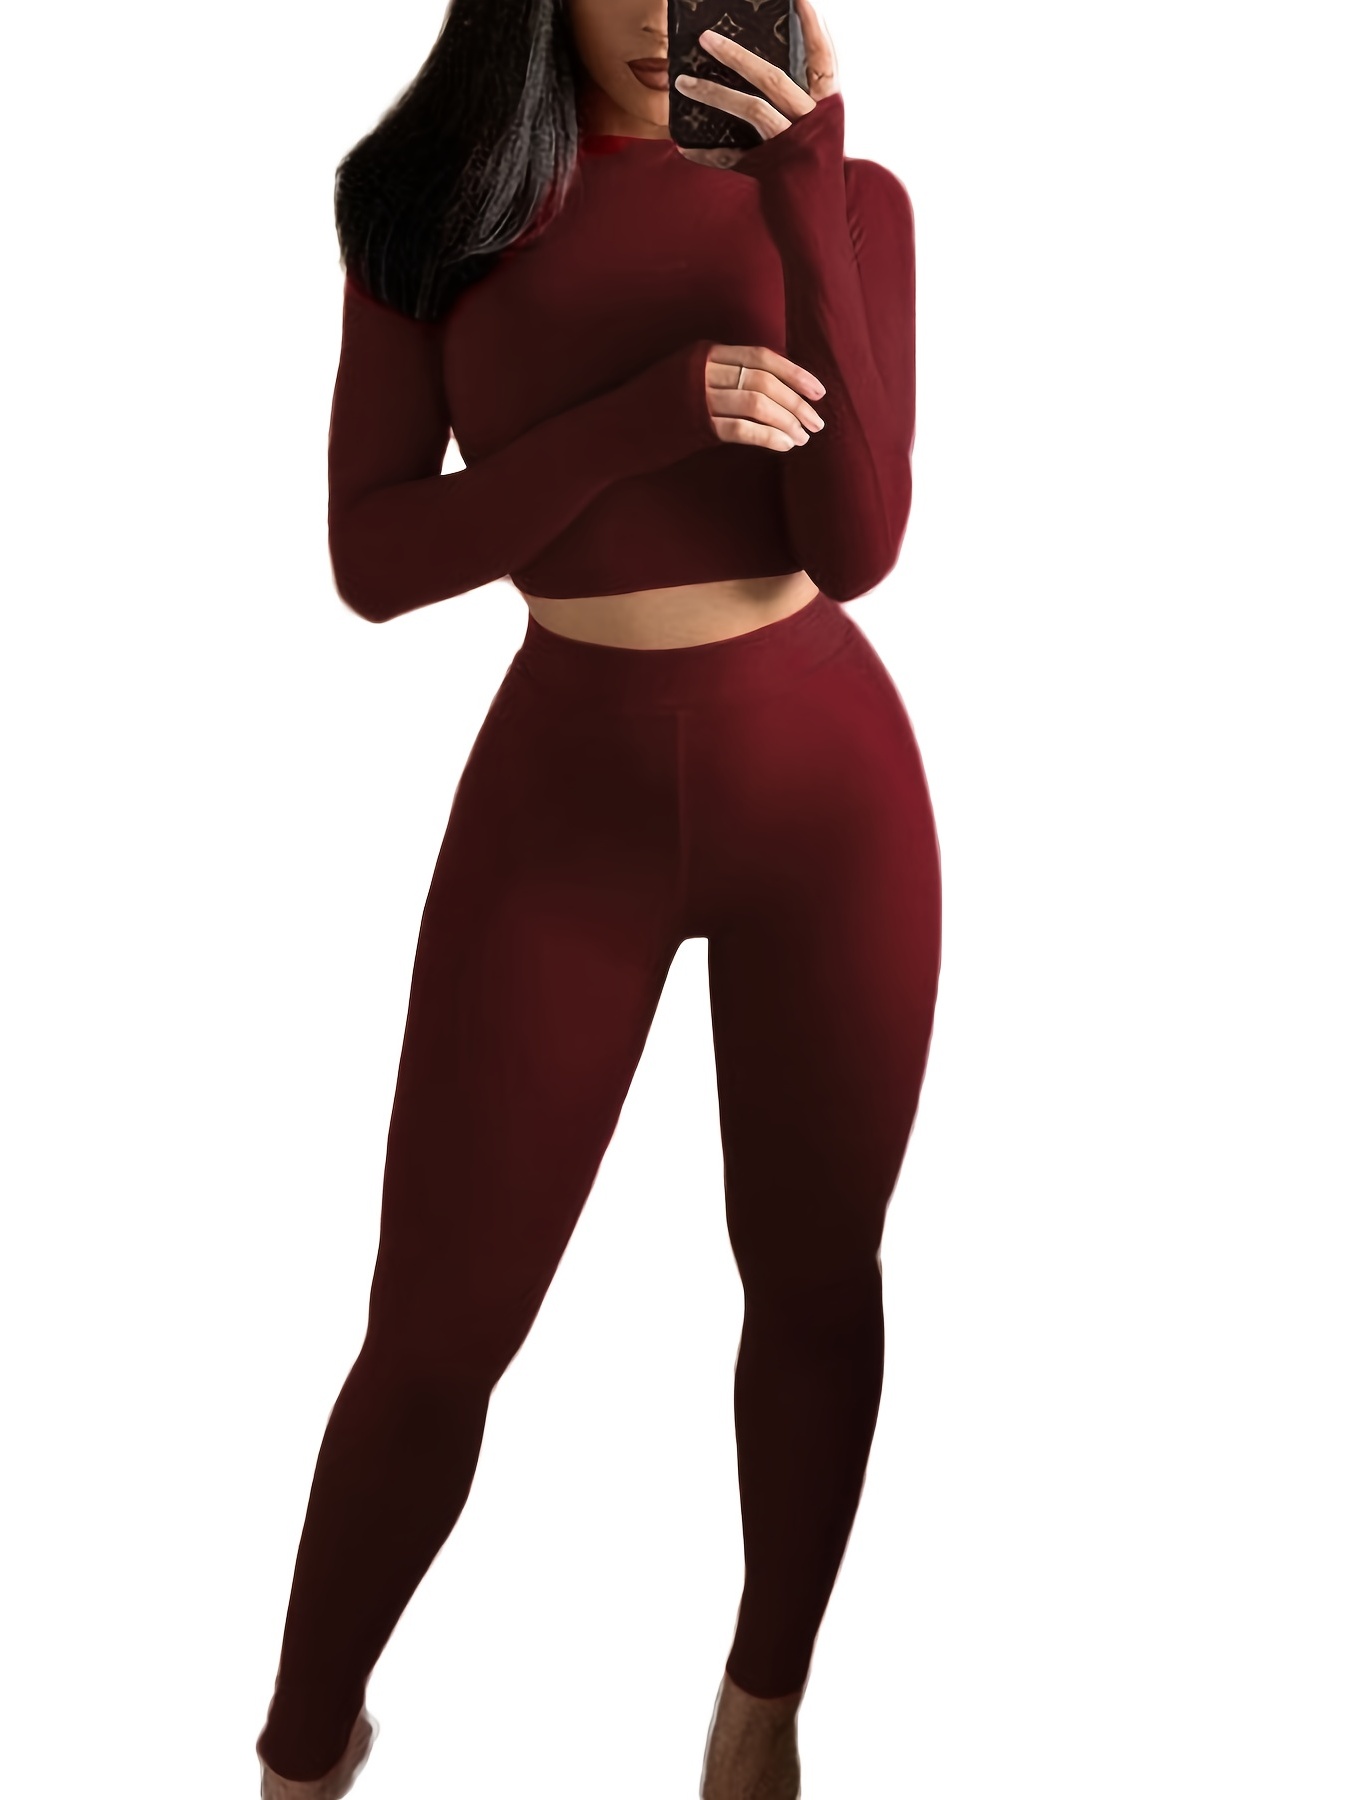 Two Piece Sets Women Solid Spring Tracksuits High Waist Stretchy Sportswear  Hot Crop Tops And Leggings Matching Outfits 